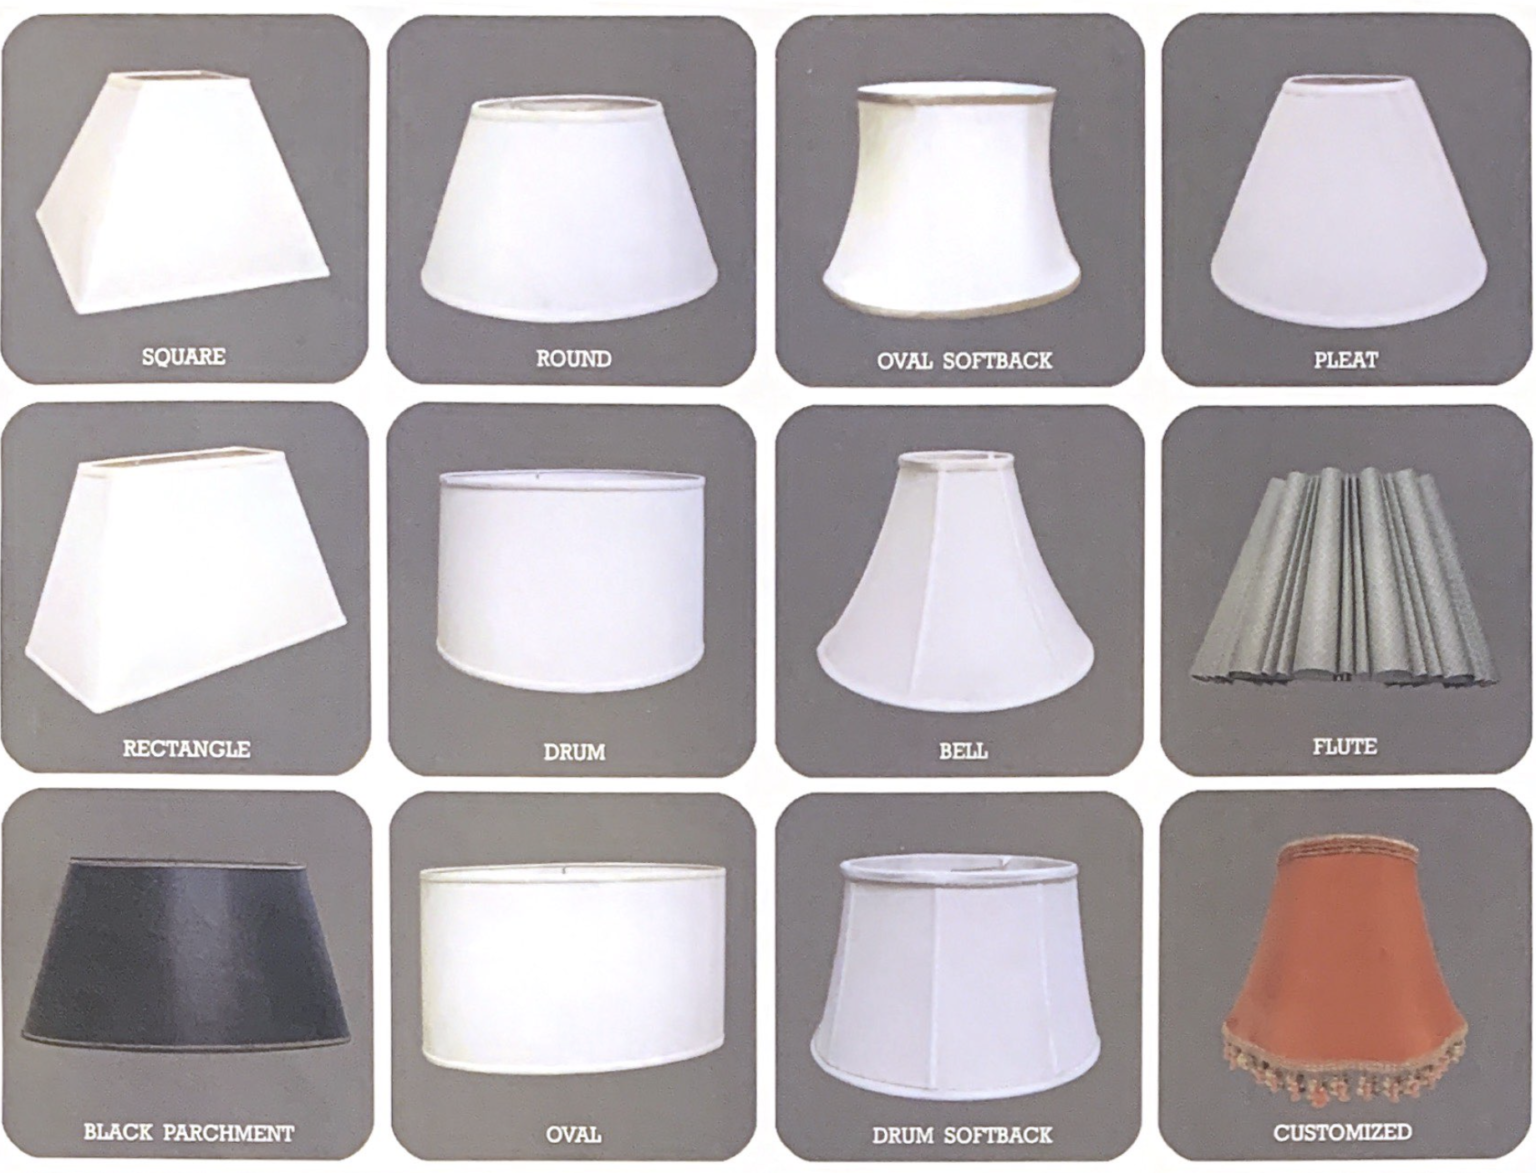 Diagram of lampshade shapes from top right to left: square, round, oval softback, pleat, rectangle, drum, bell, flute, black parchment, oval, drum softback, customized.